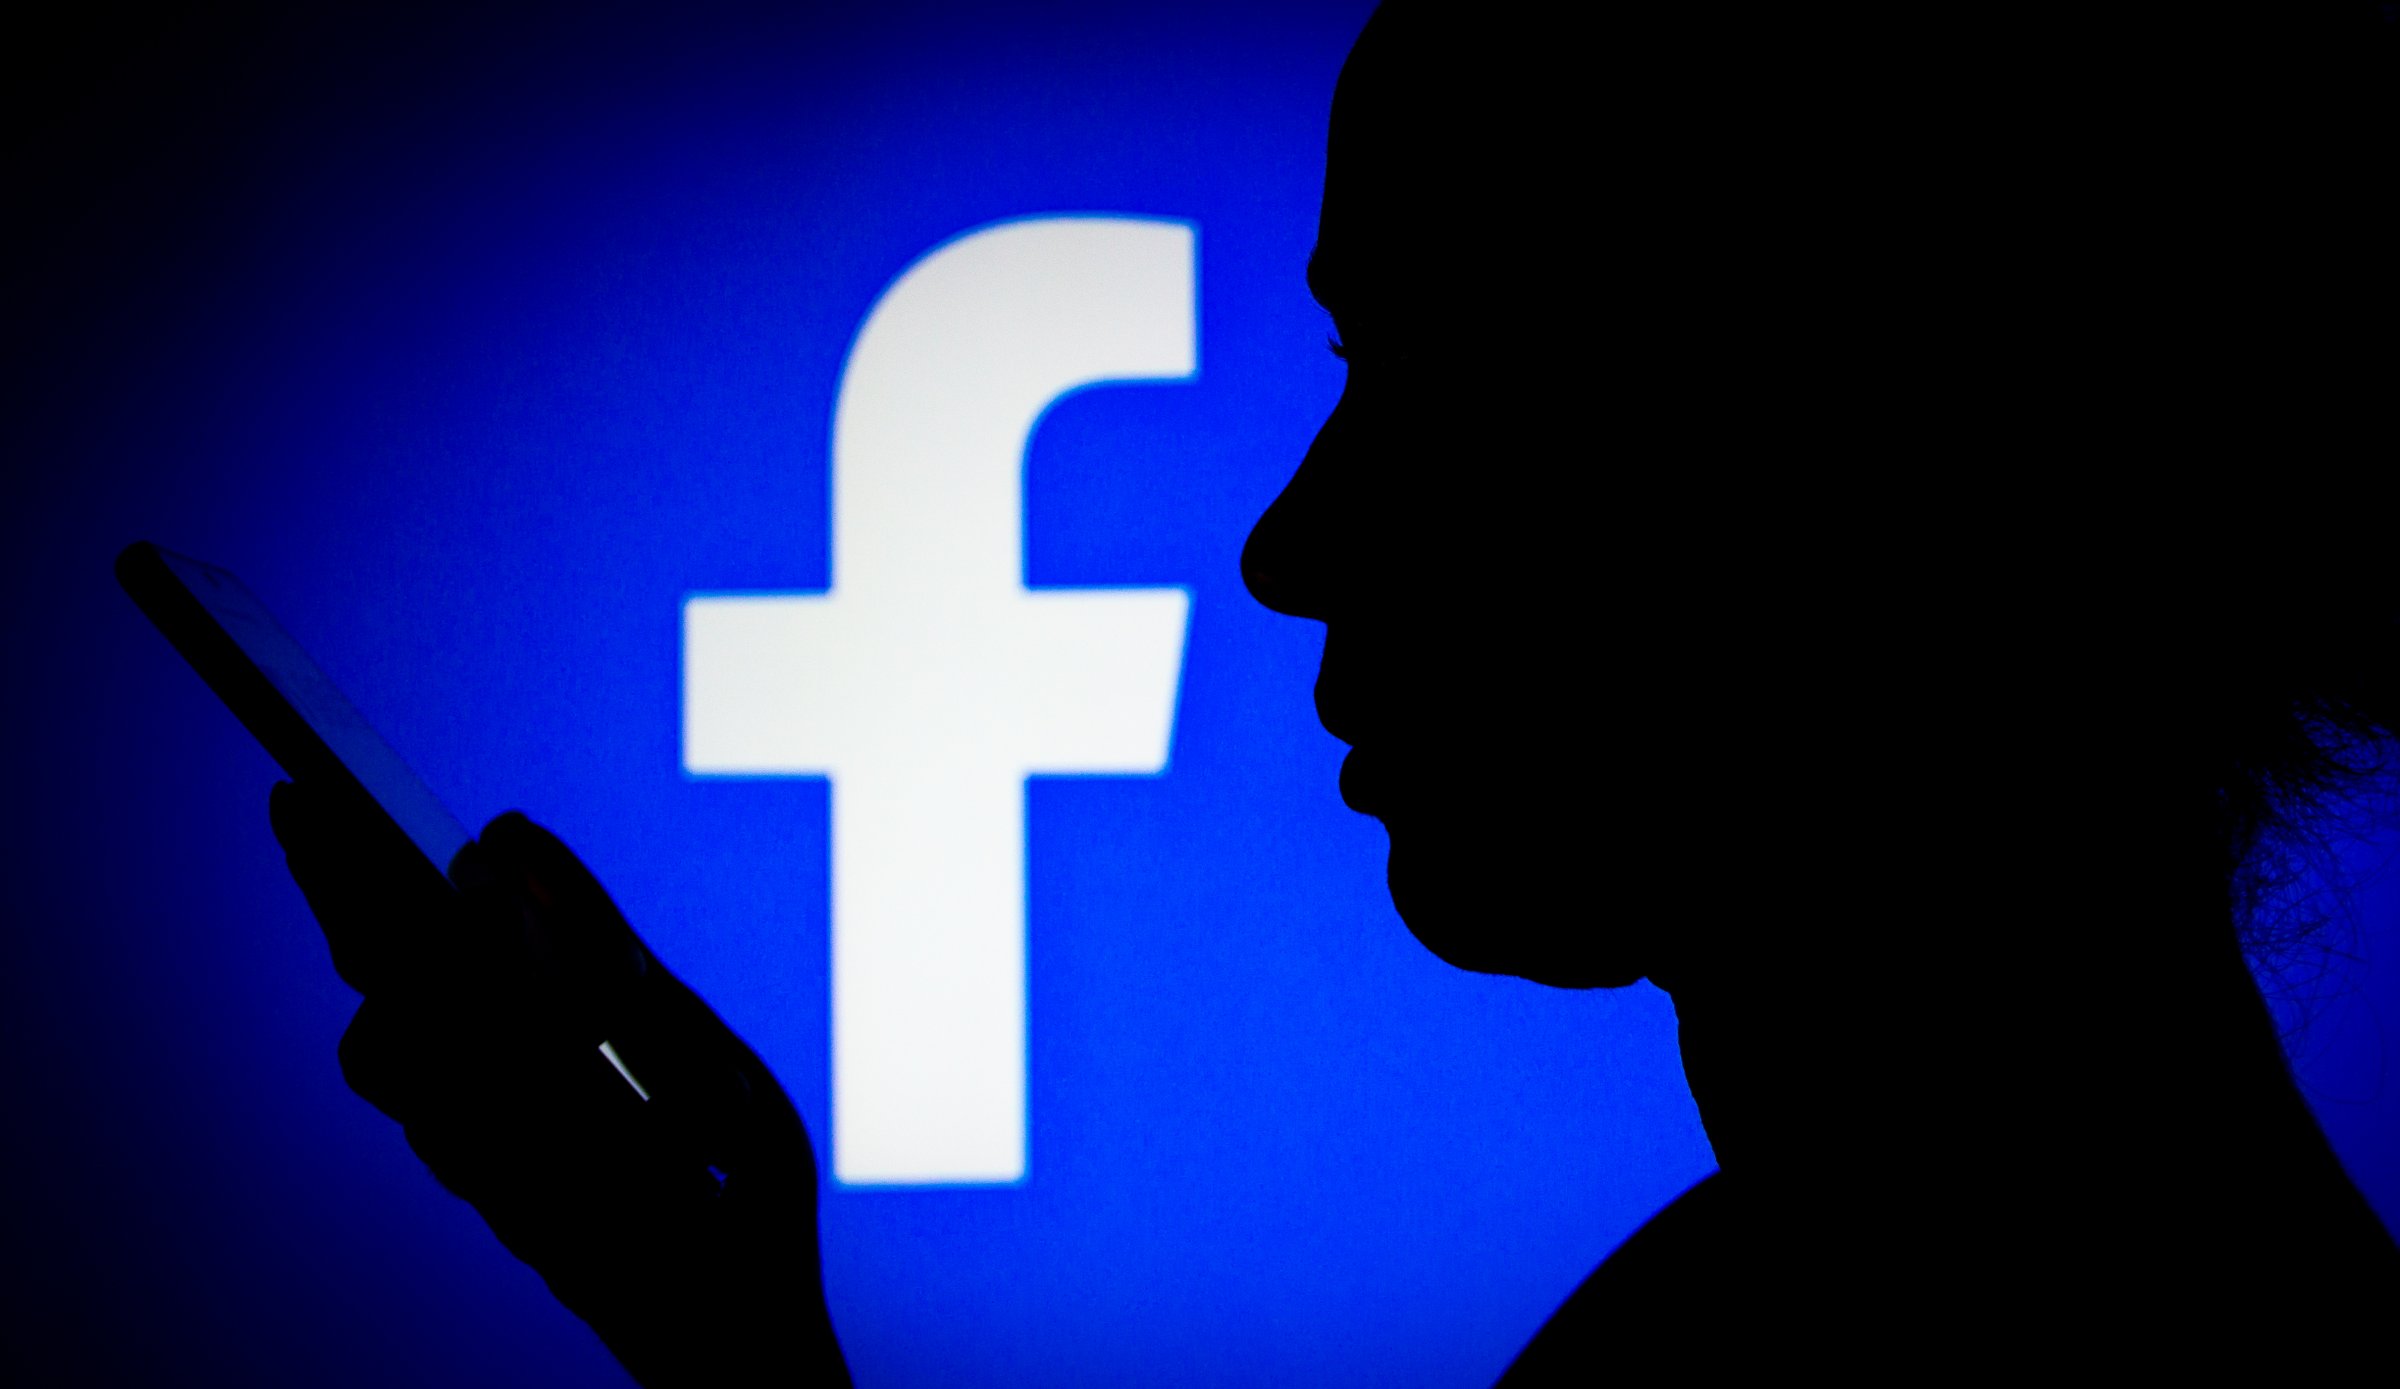 In this photo illustration, the Facebook logo is seen in the background of a silhouette of a woman holding a mobile phone.